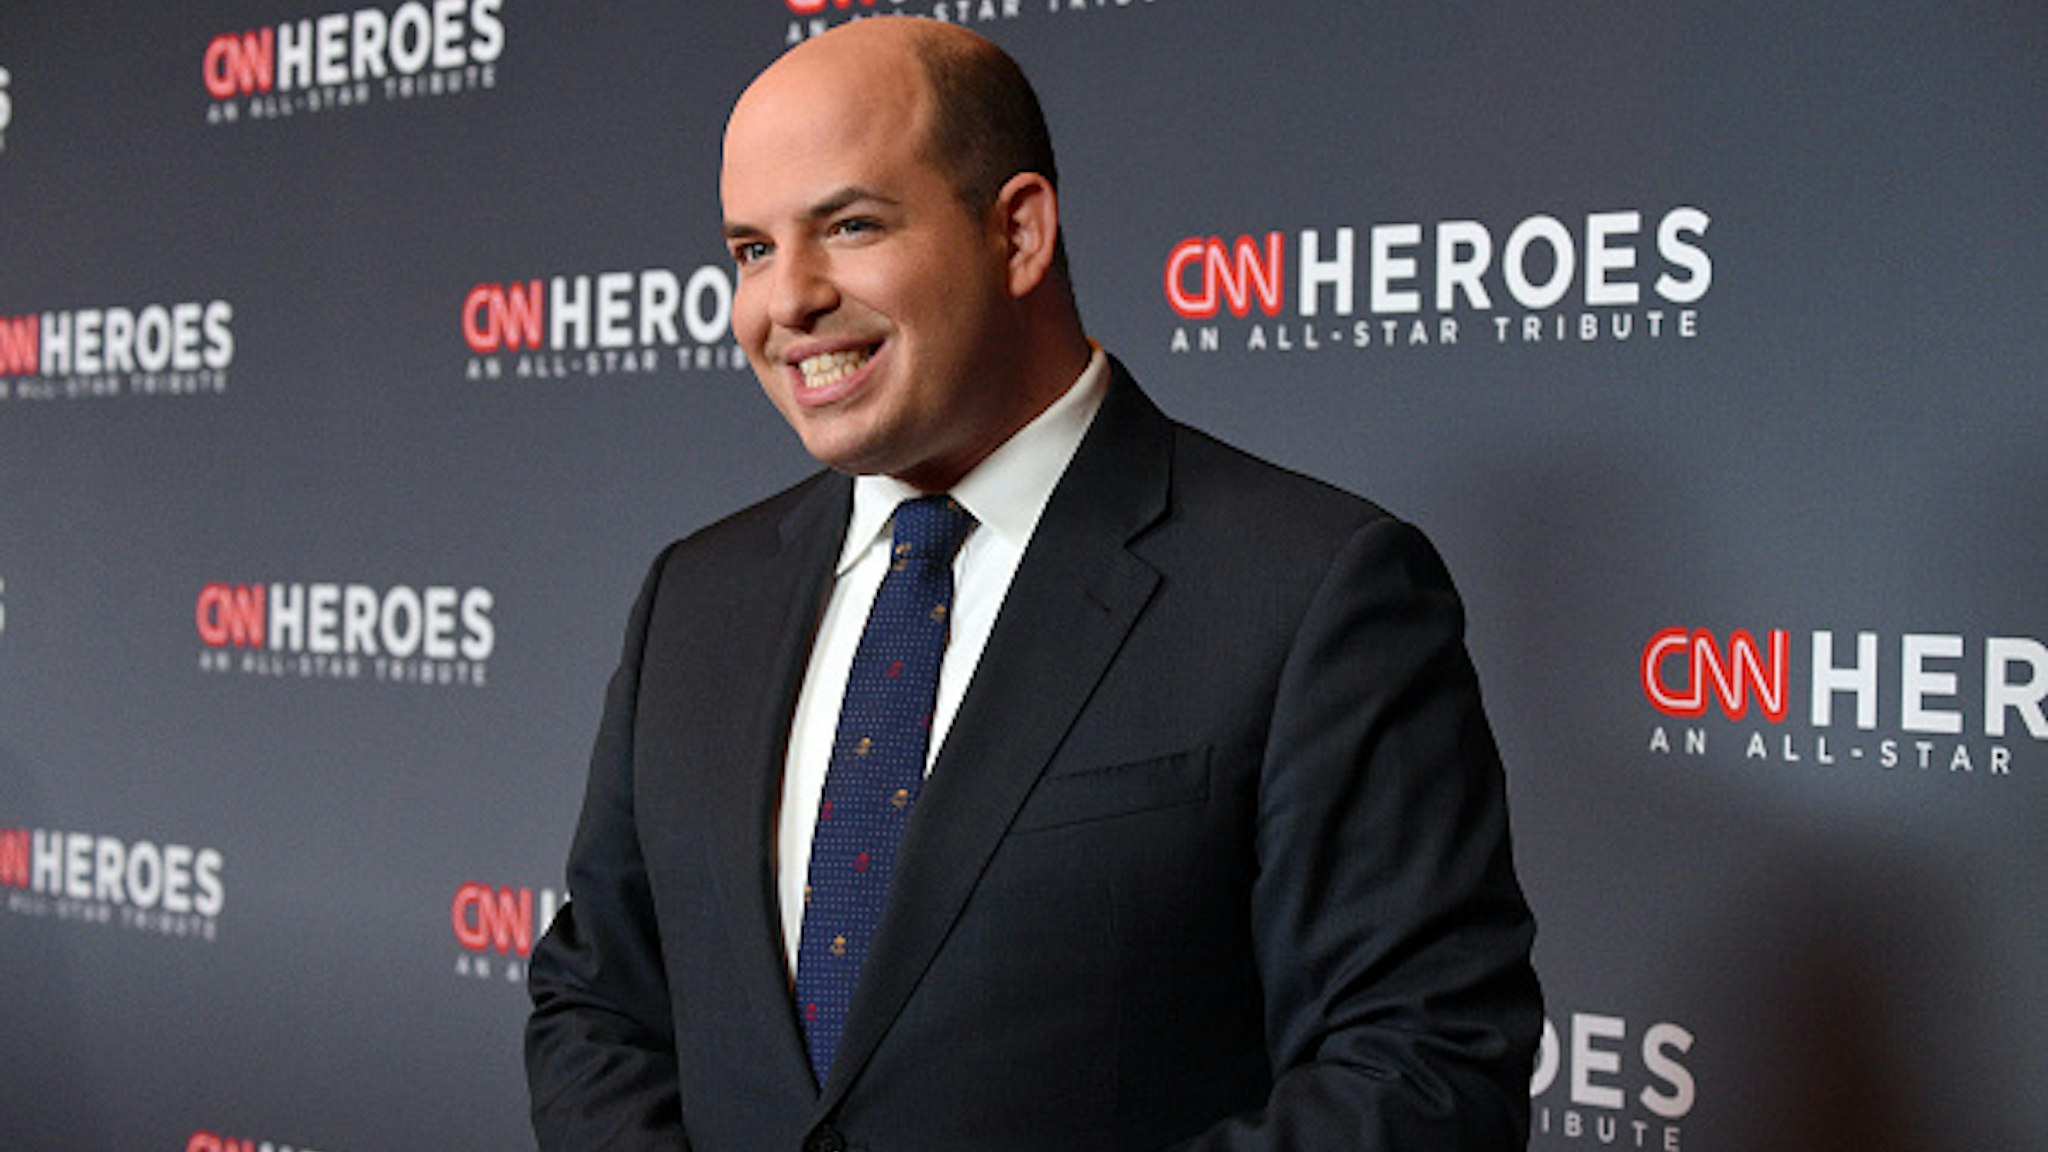 NEW YORK, NEW YORK - DECEMBER 08: Brian Stelter attends CNN Heroes at the American Museum of Natural History on December 08, 2019 in New York City.